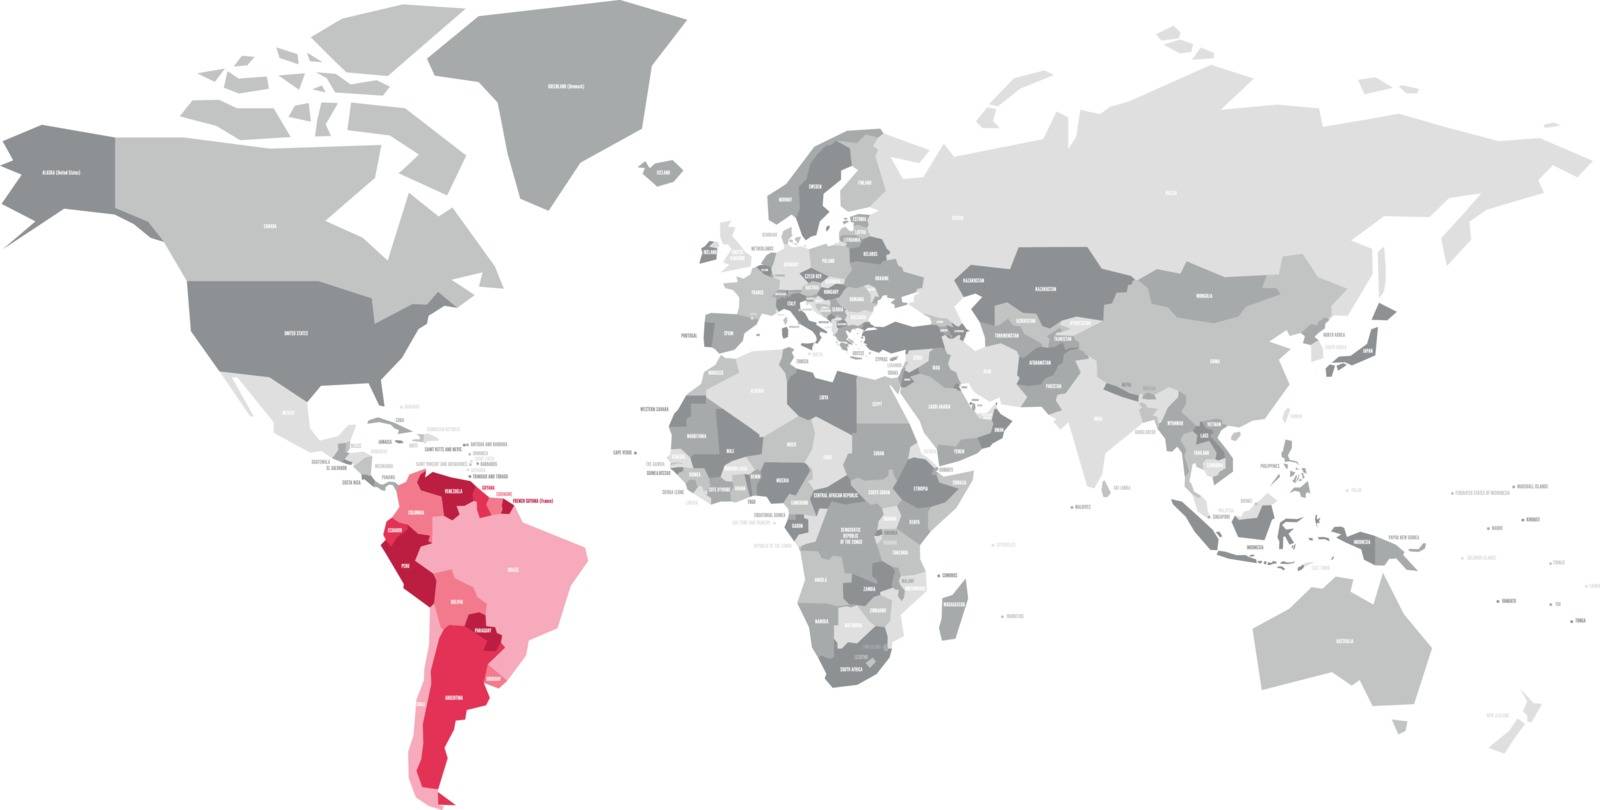 Map of World in grey colors with red highlighted countries of South America. Vector illustration.